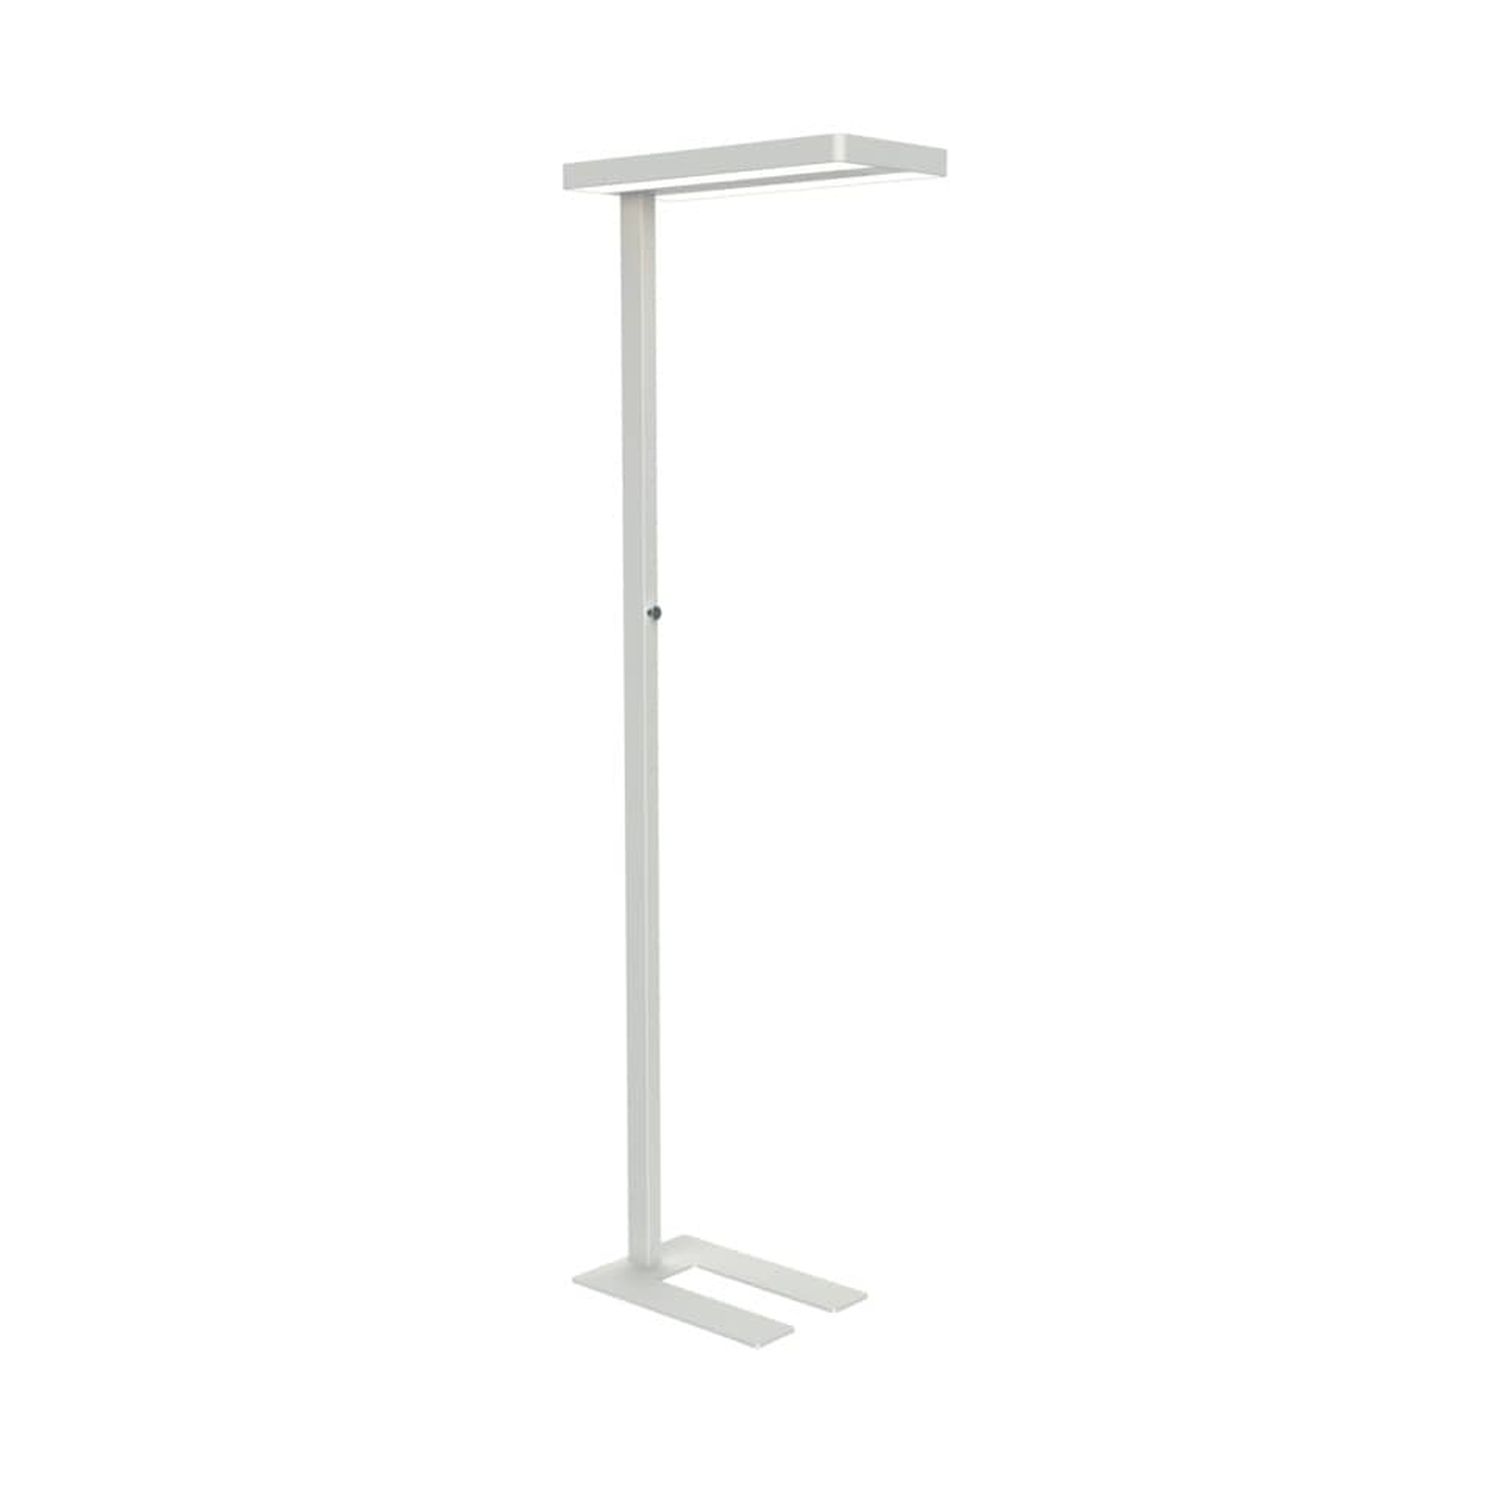 LED-Standleuchte MAULjaval, dimmbar - silber